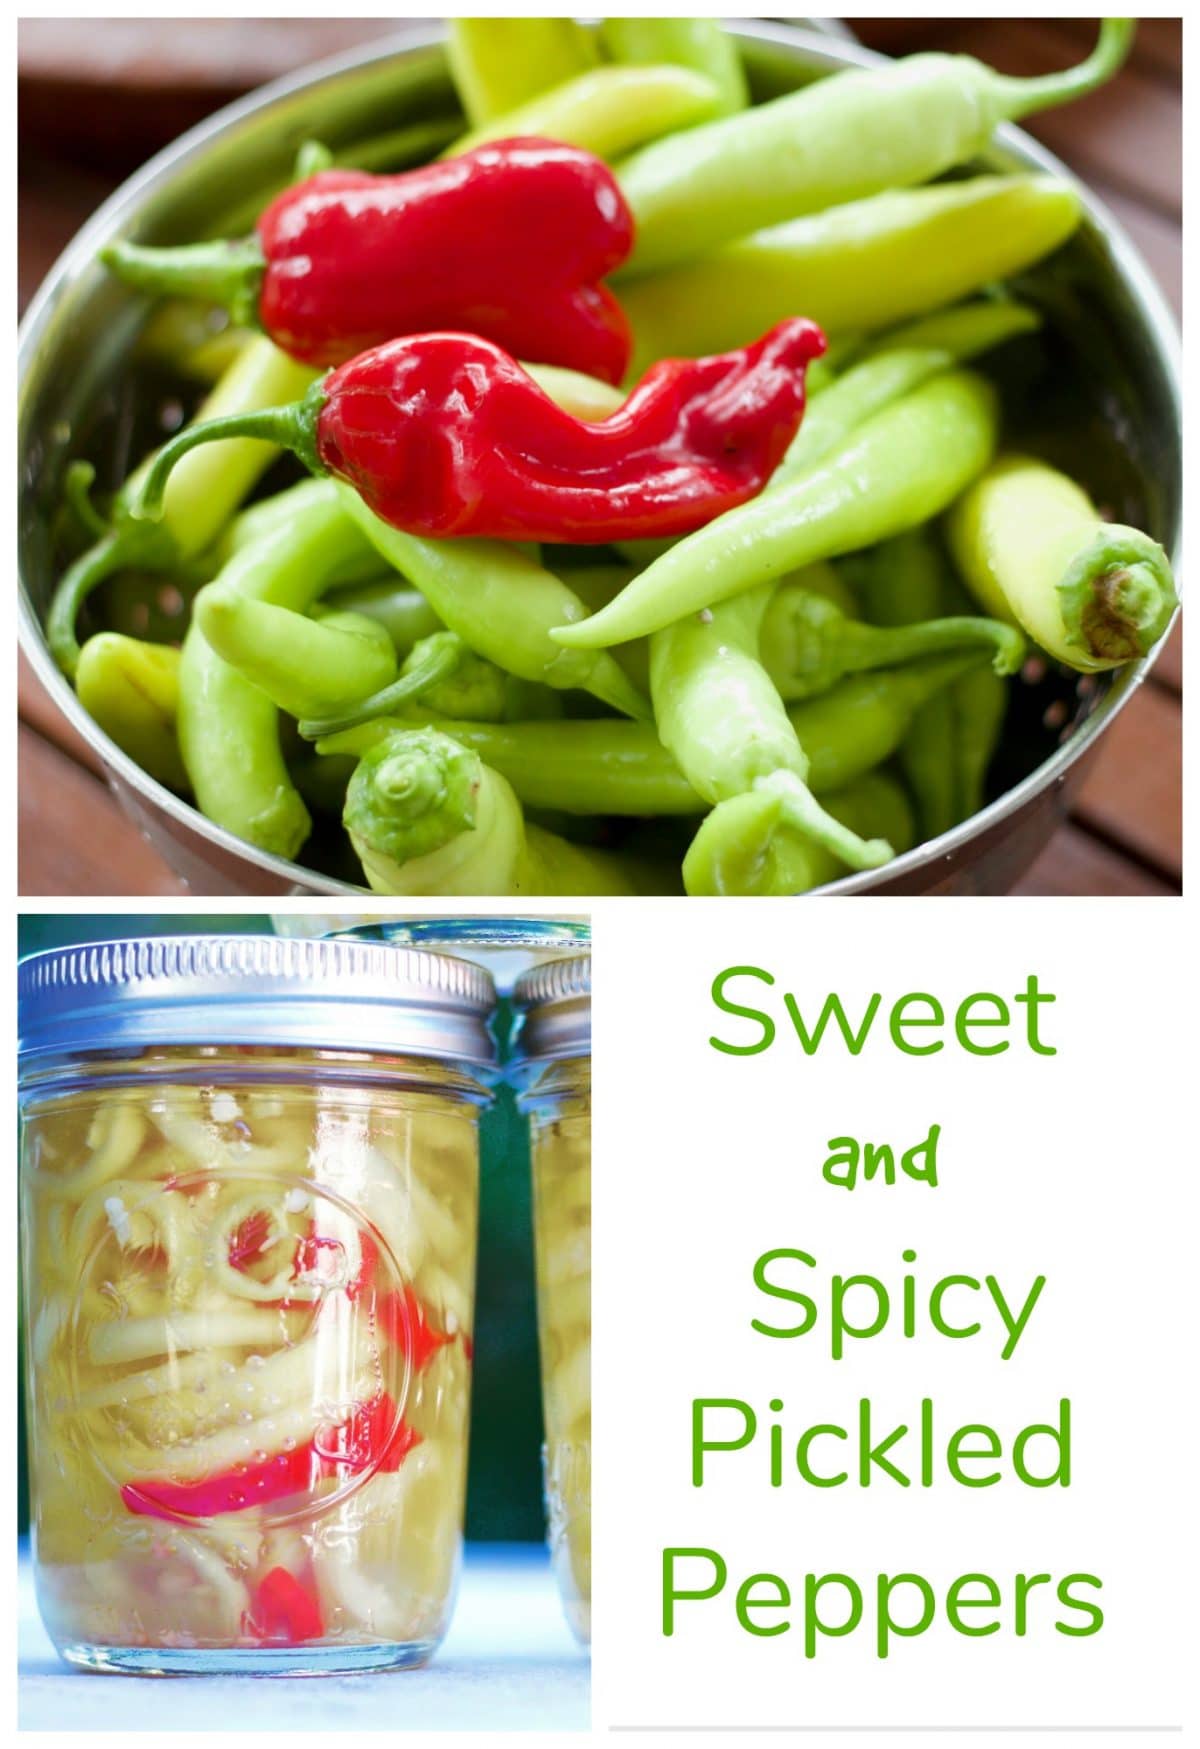 Sweet and Spicy Pickled Peppers || Erin Brighton | pickling | veggies | Got To Be NC | pickled peppers | gluten free | vegan | easy preserving